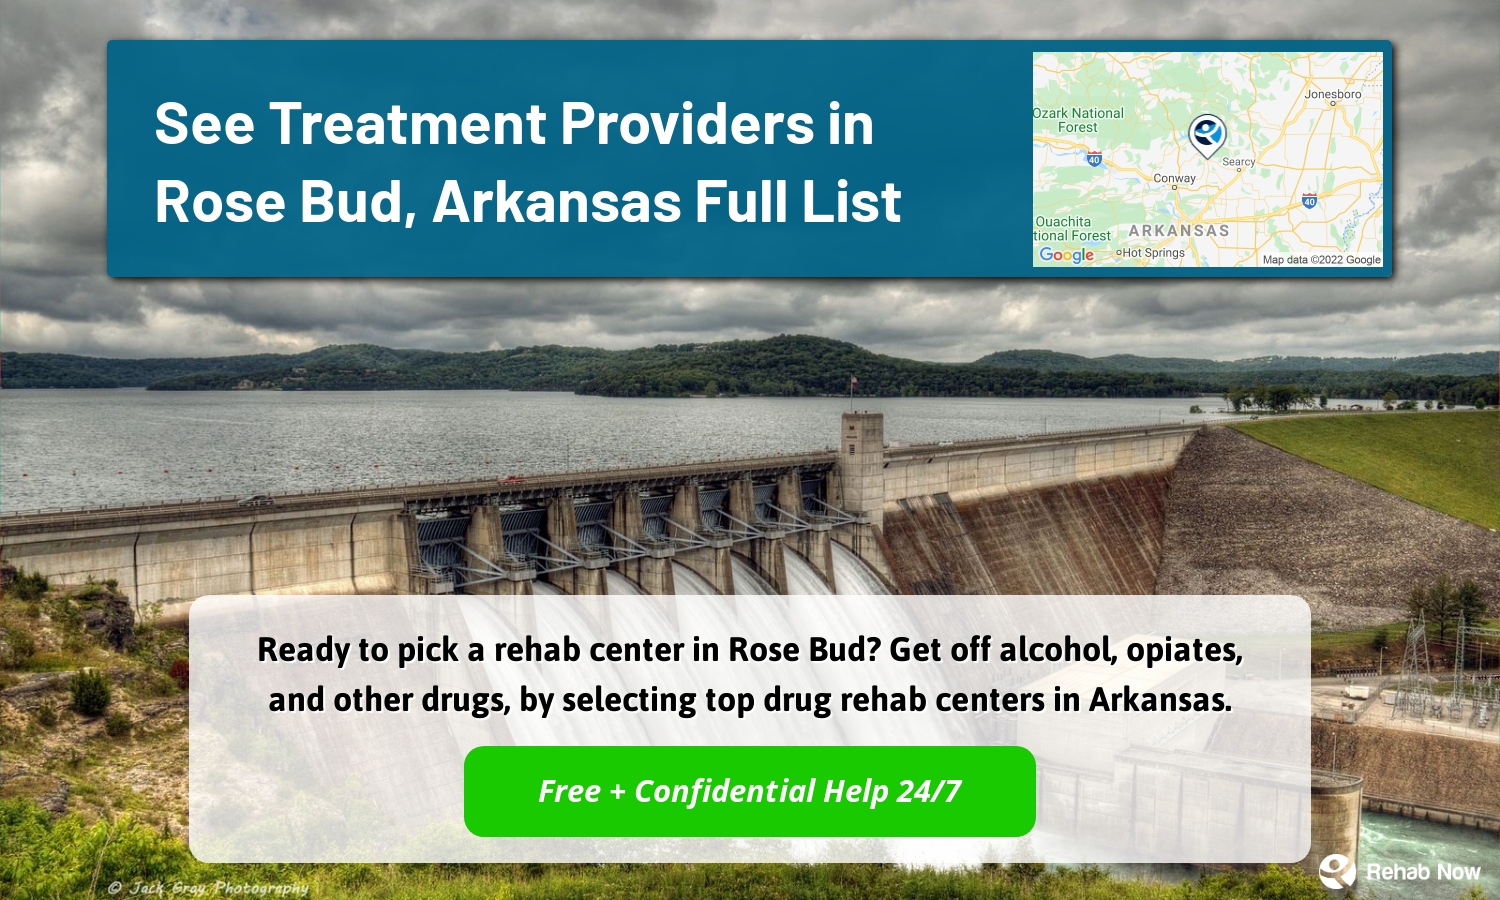 Ready to pick a rehab center in Rose Bud? Get off alcohol, opiates, and other drugs, by selecting top drug rehab centers in Arkansas.